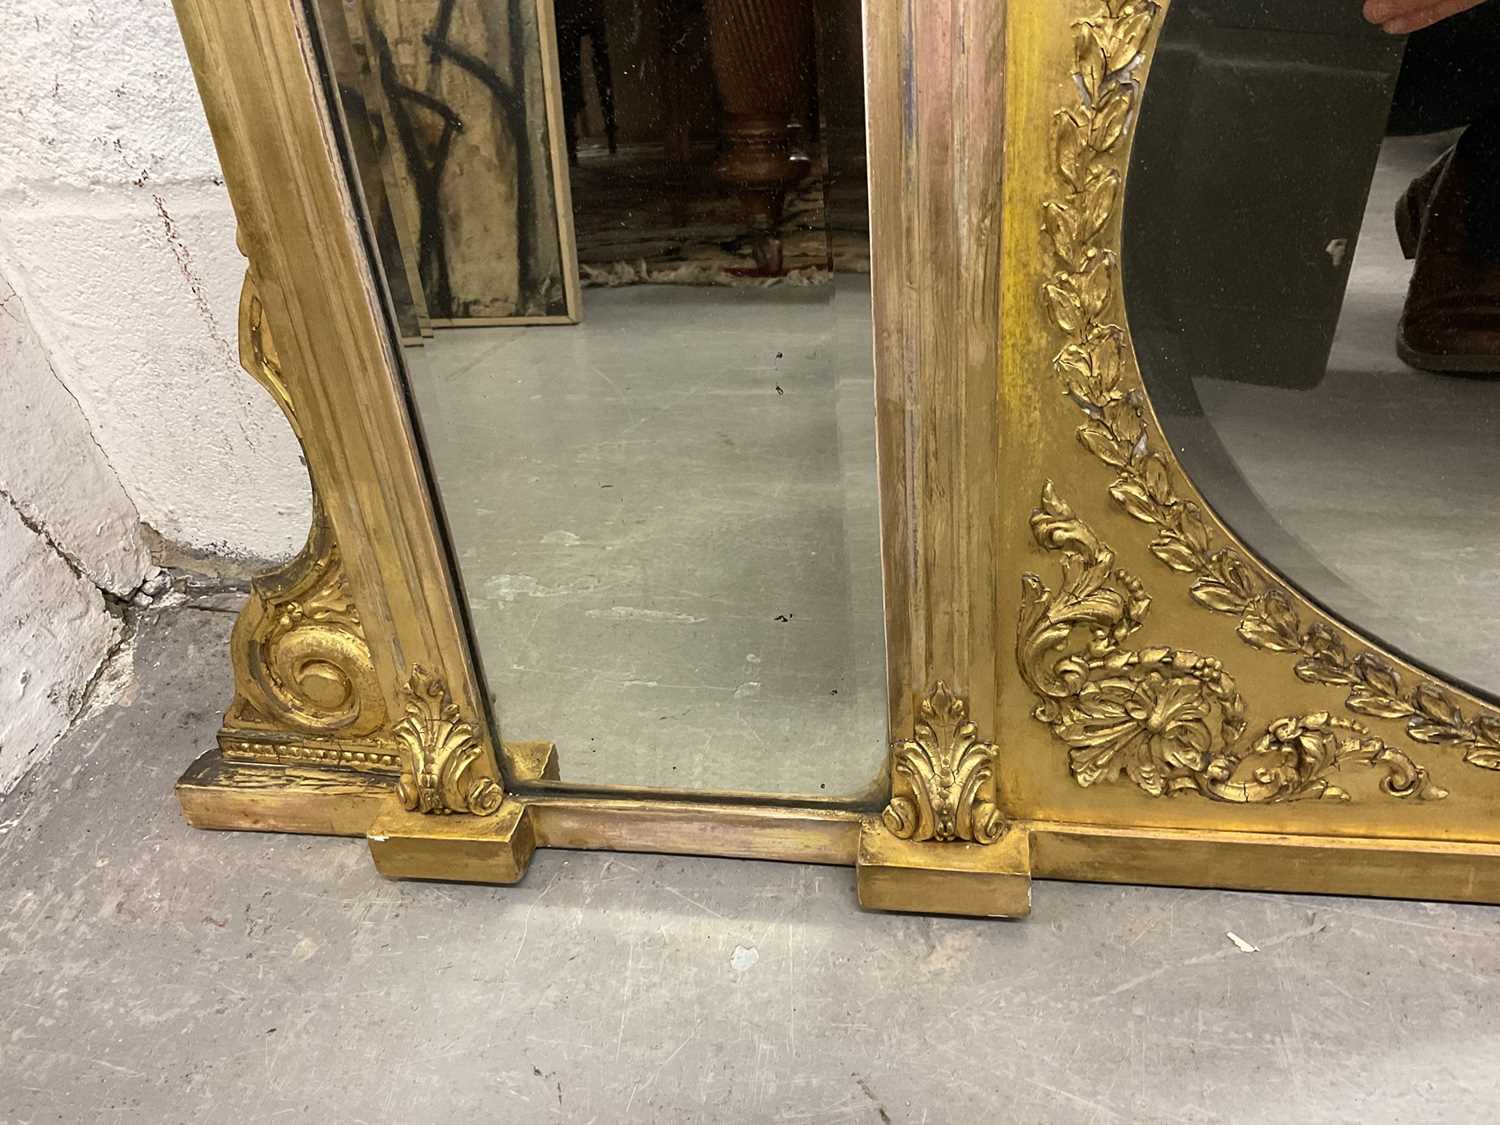 Early 19th century overmantel mirror in gilt frame - Image 4 of 6